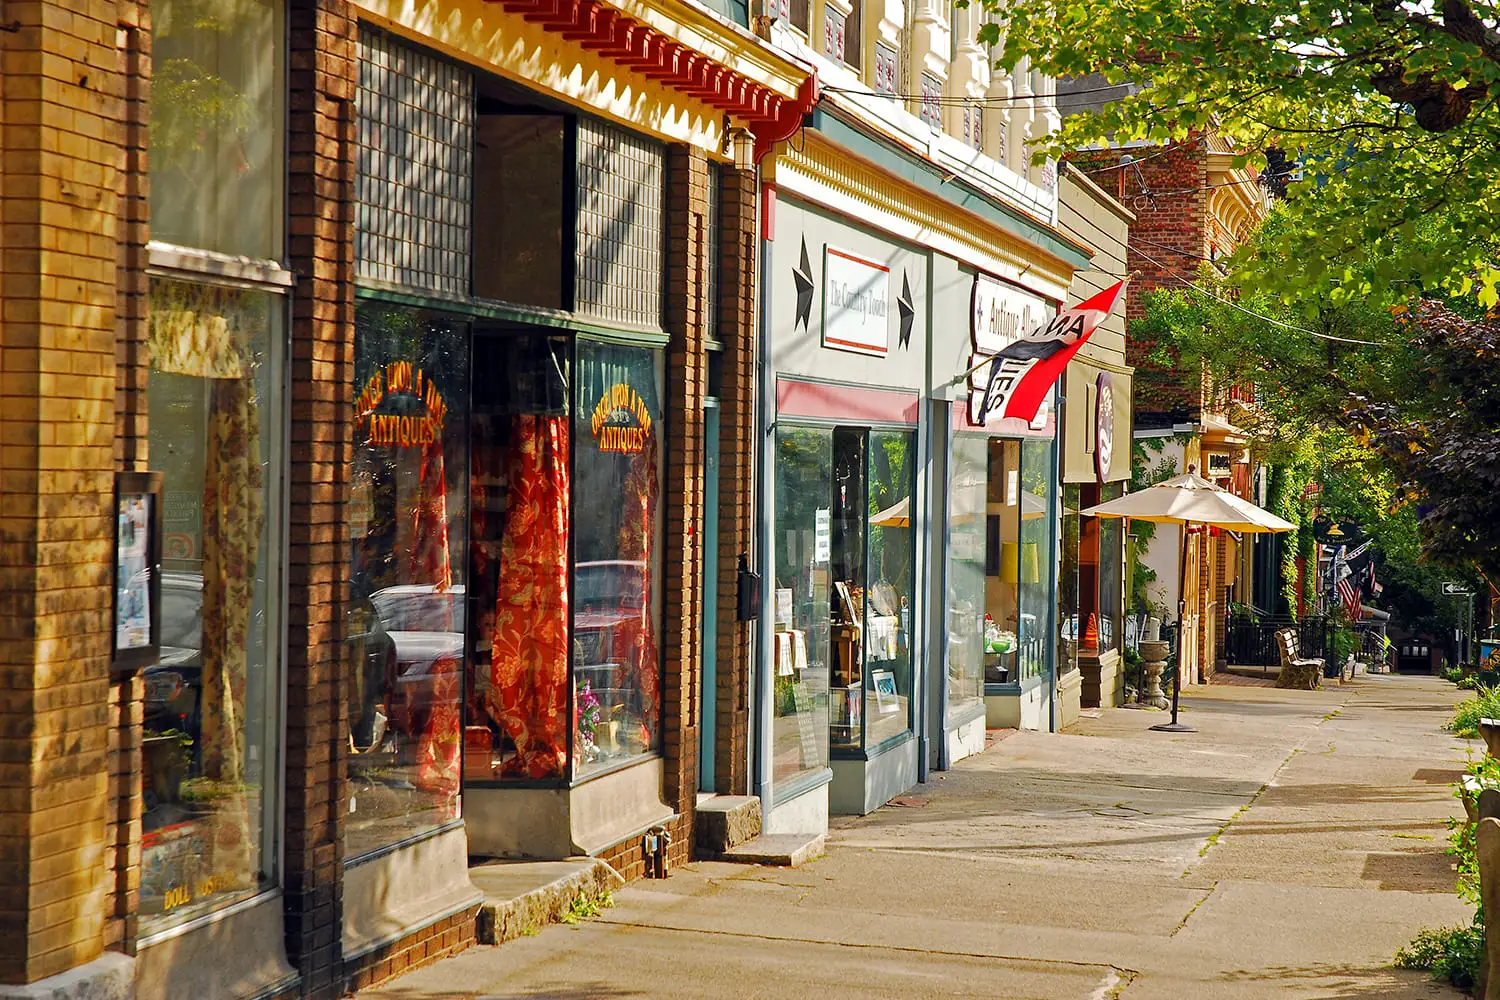 Boutiques and independent stores populate the charming historic downtown Cold Spring, New York, USA